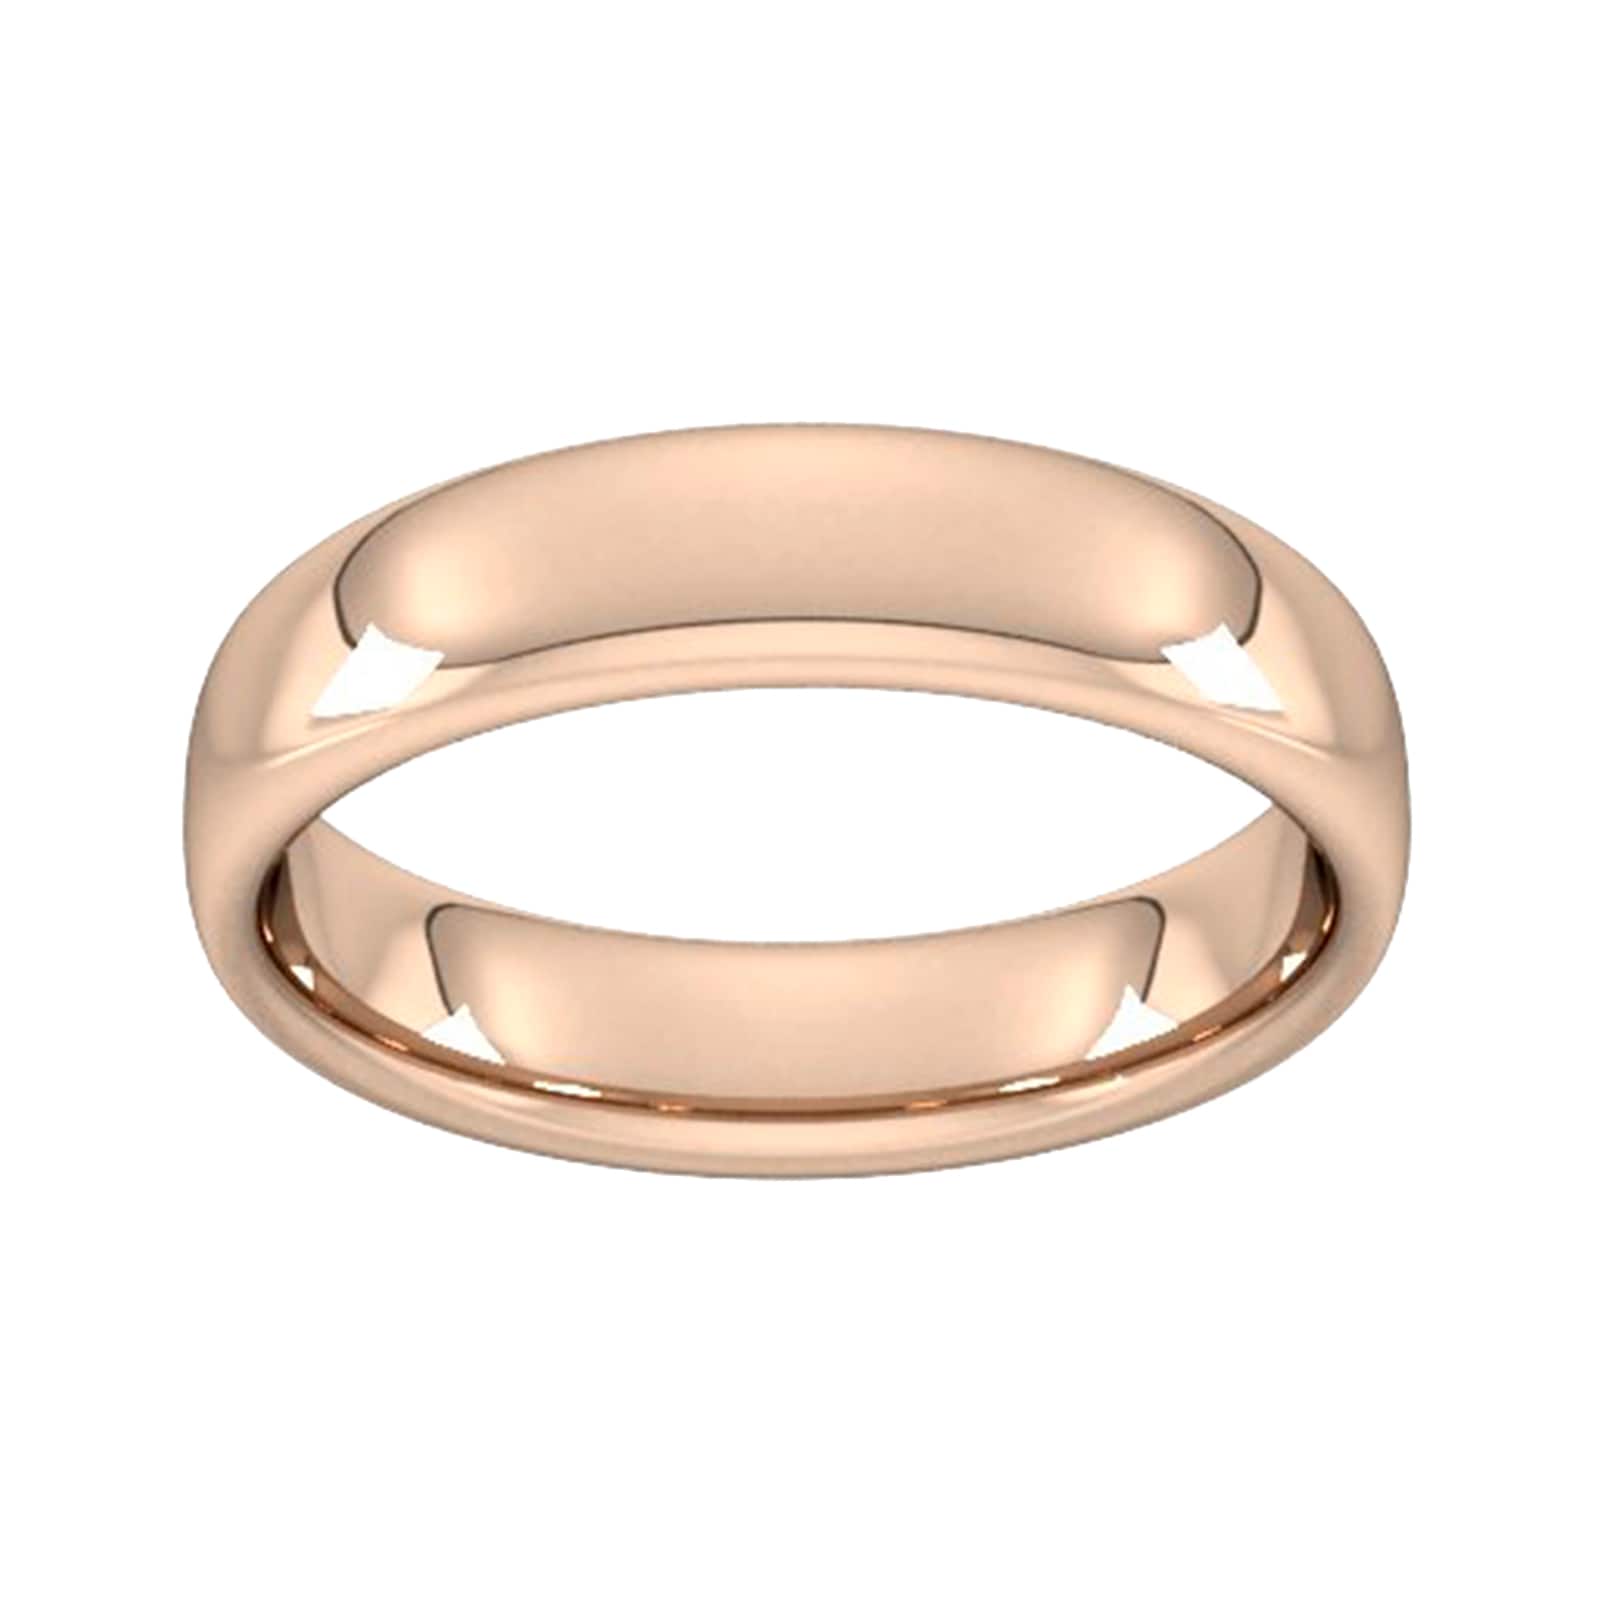 5mm Slight Court Heavy Wedding Ring In 18 Carat Rose Gold - Ring Size H